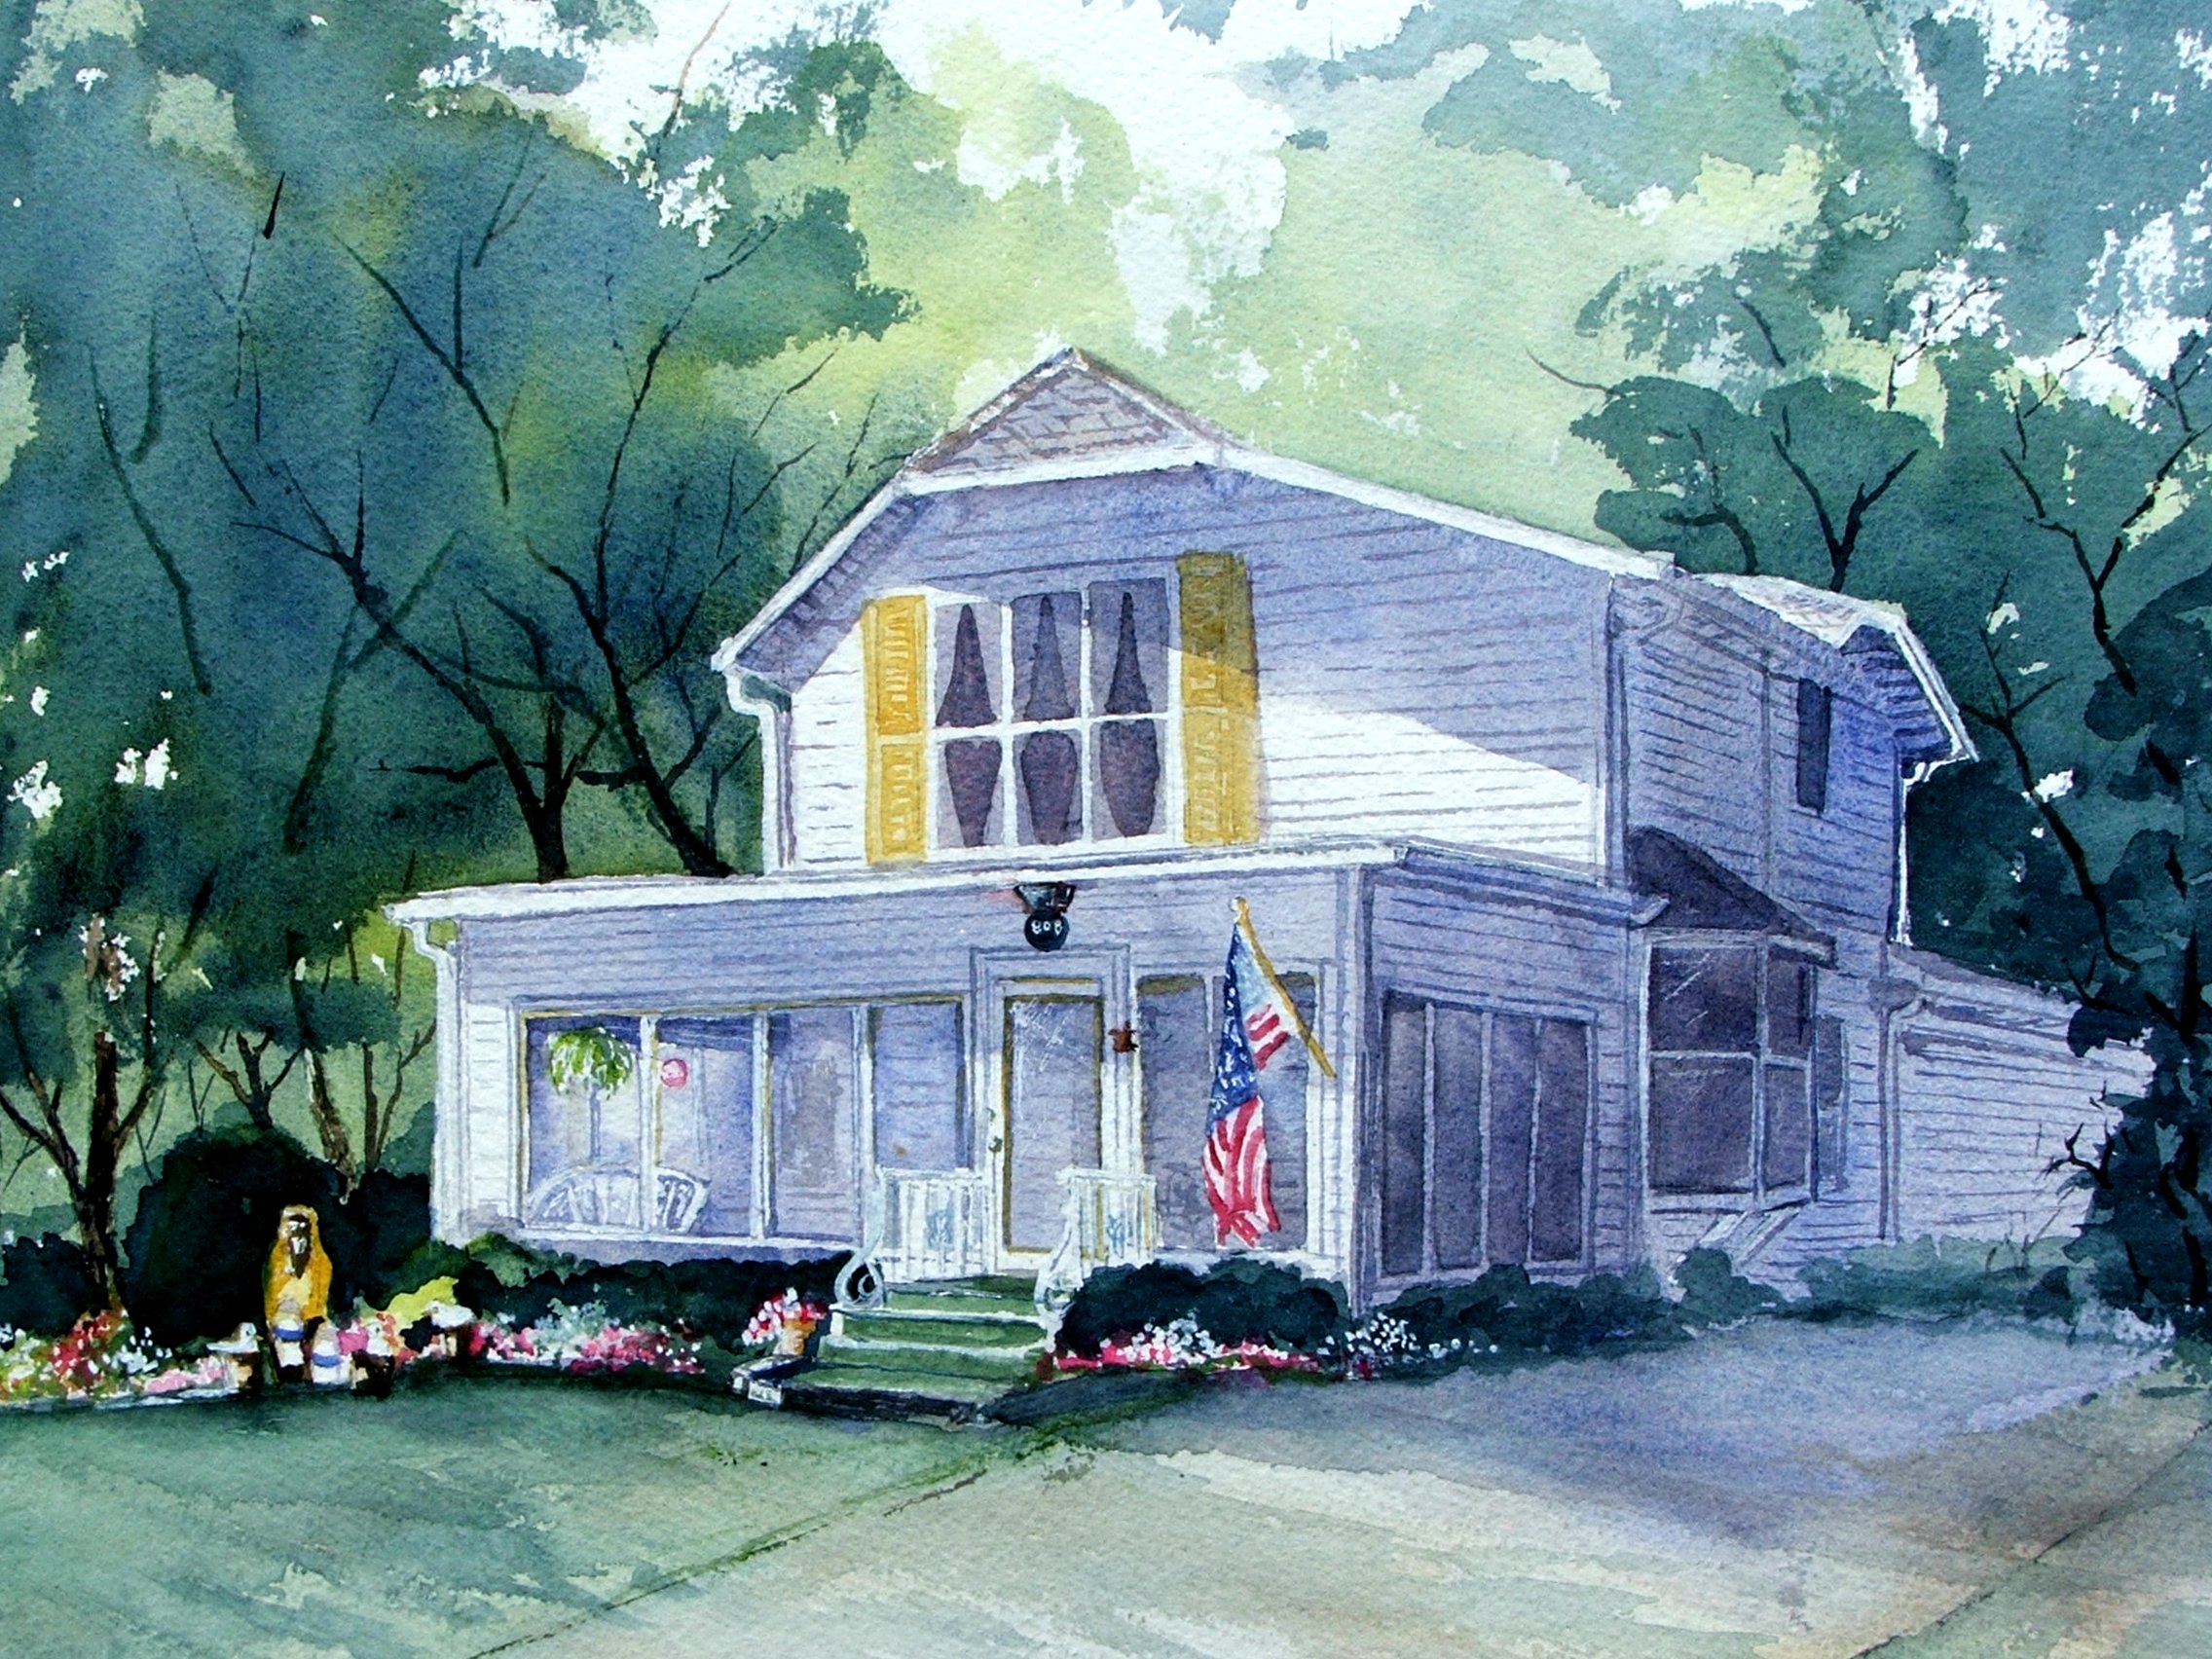 "Lakeside" - Apostos Cottage - was repainted after they remodeled